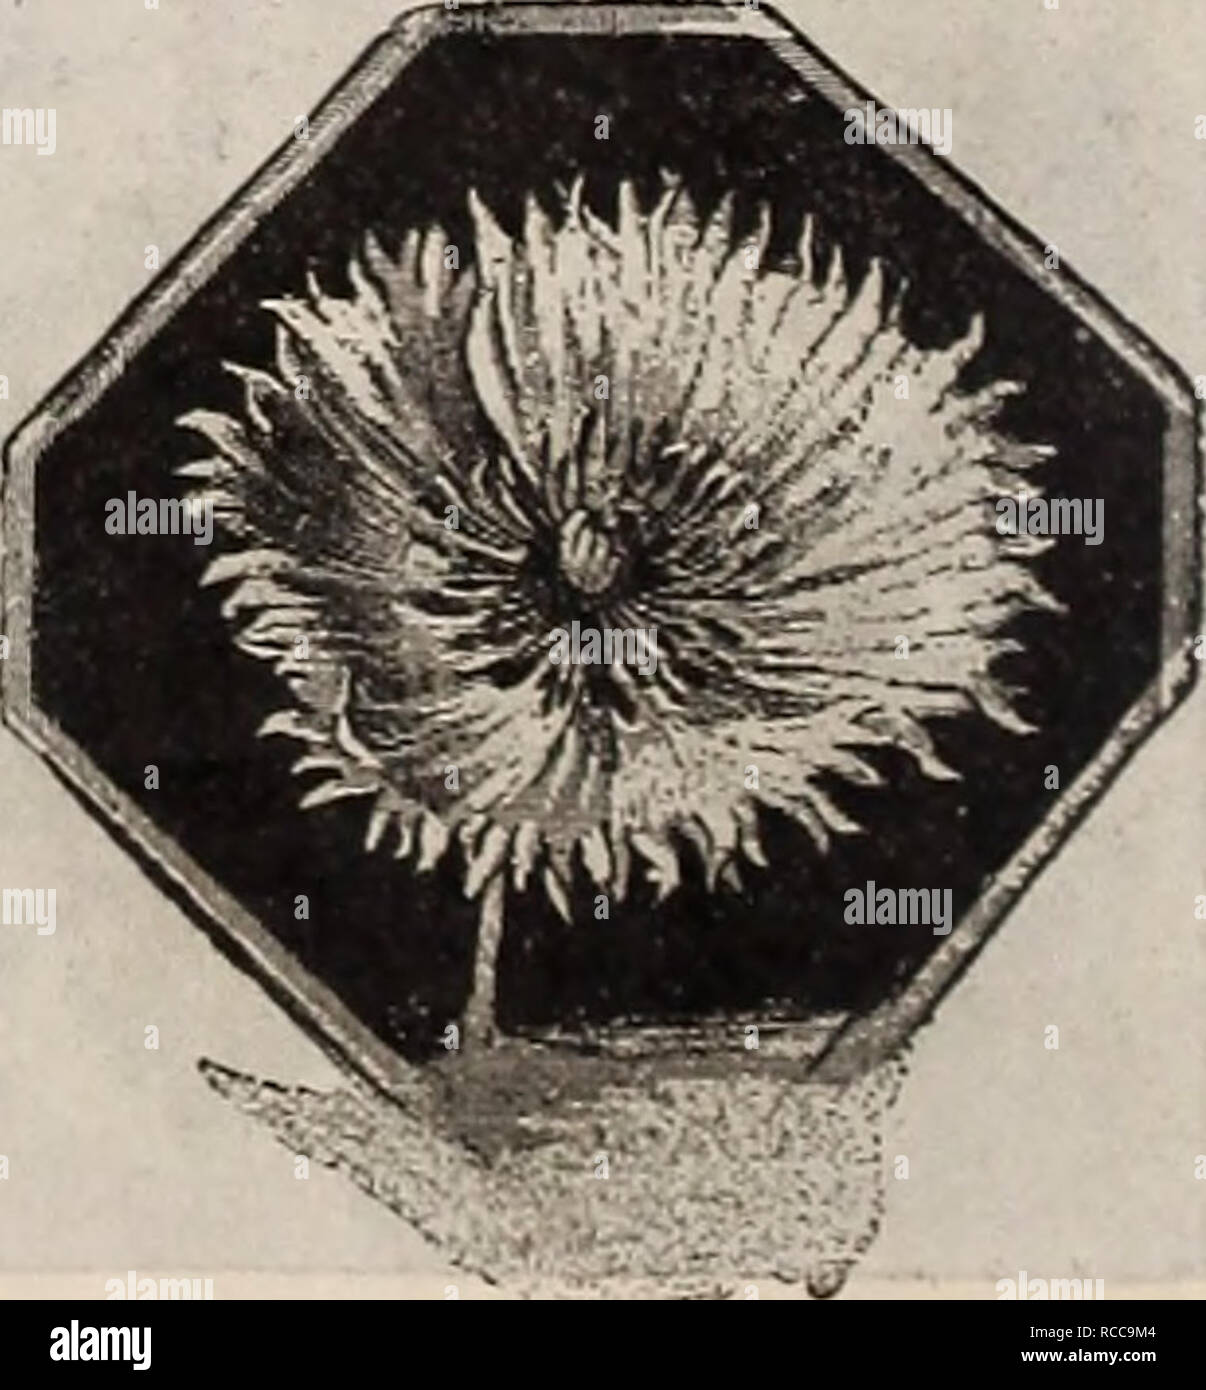 . Dreer's 1901 garden calendar. Seeds Catalogs; Nursery stock Catalogs; Gardening Equipment and supplies Catalogs; Flowers Seeds Catalogs; Vegetables Seeds Catalogs; Fruit Seeds Catalogs. JMiss Sherwood. Fringed Alpine Poppy. (Papaver Alpinum Laciuiatum.) 3741 A distinct &quot; break &quot; in the dainty little Alpine Poi^py. The plant forms rosettes of pretty grey-green foliage not over 4 inches high, and throws up numerous slender flower-.stalks, bear- ing charming flowers of white, salmon, rose or orange, all with yellow stamens, the petals grace- fully laciniated or fringed like an edging  Stock Photo